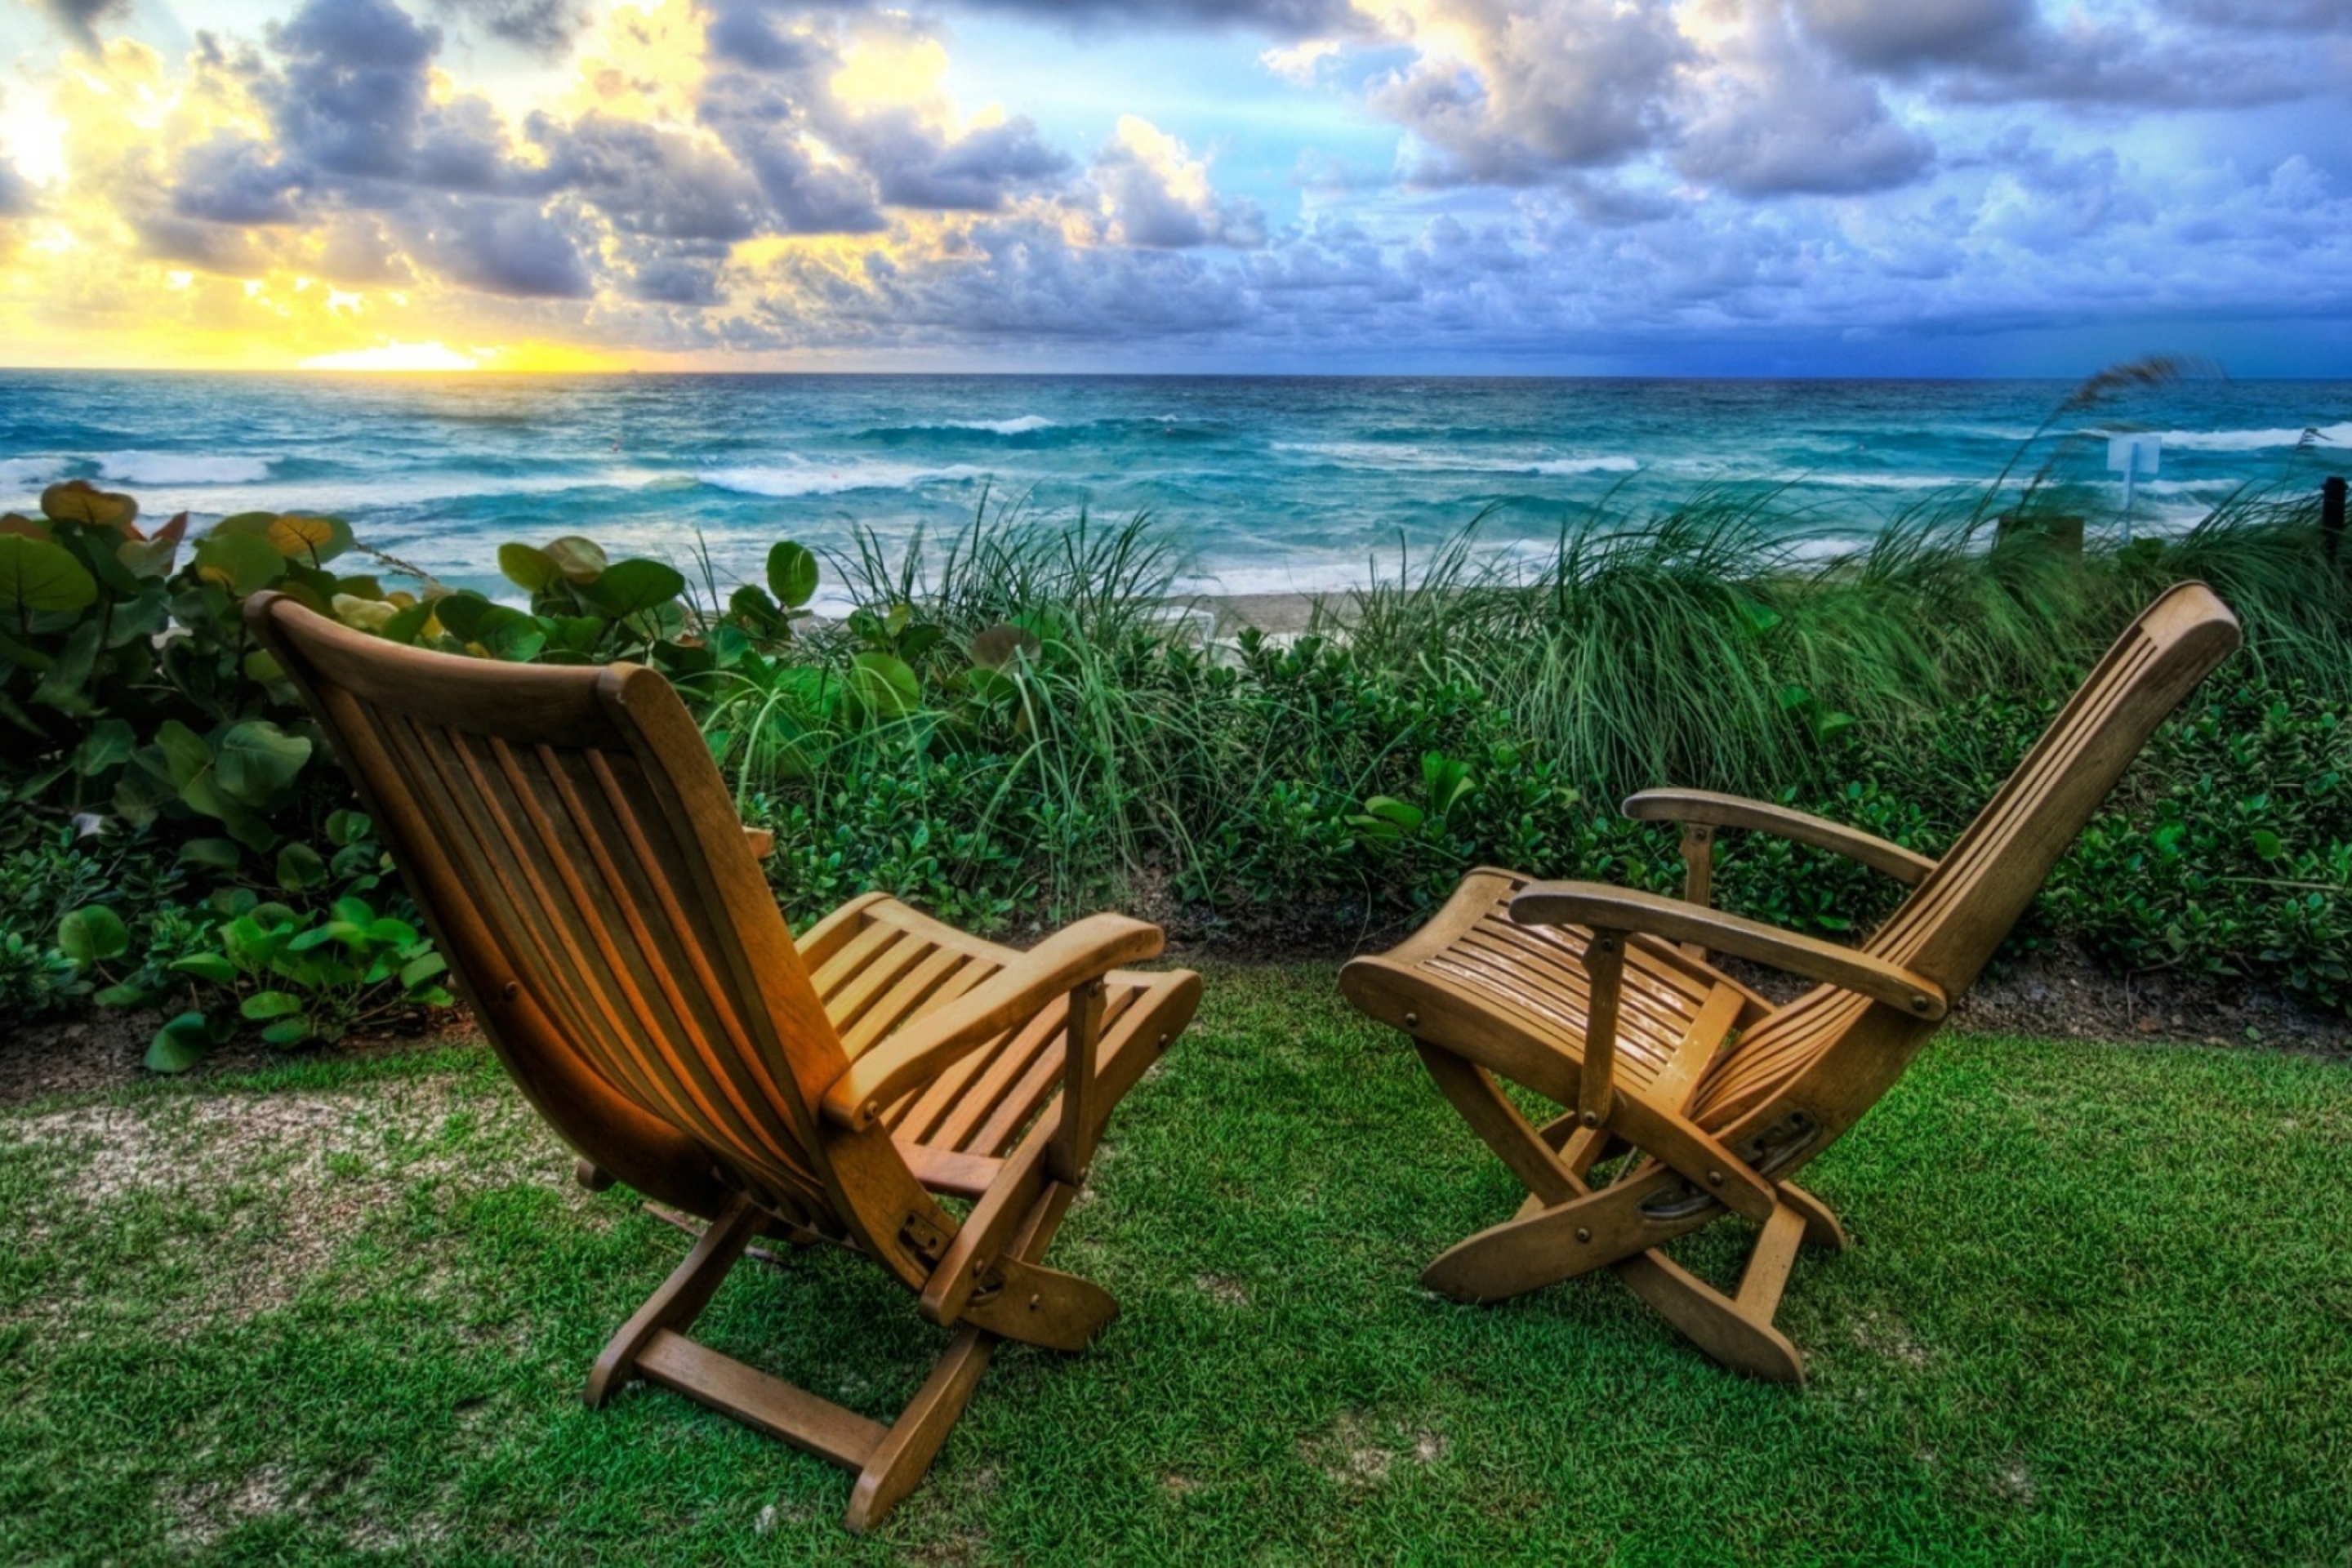 Das Chairs With Sea View Wallpaper 2880x1920